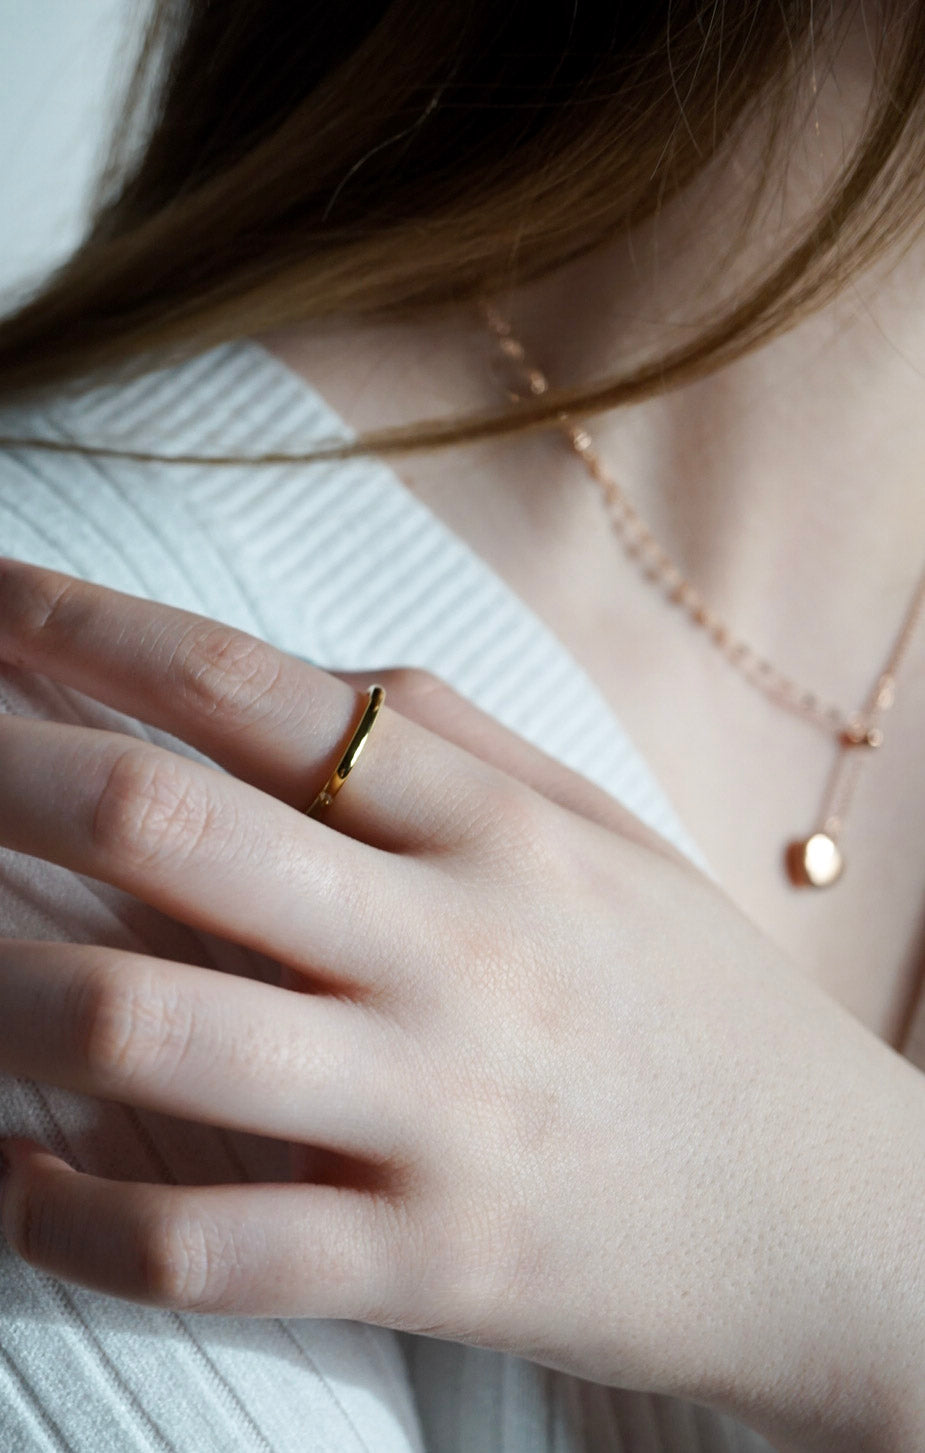 Gold Square Geometry Ring